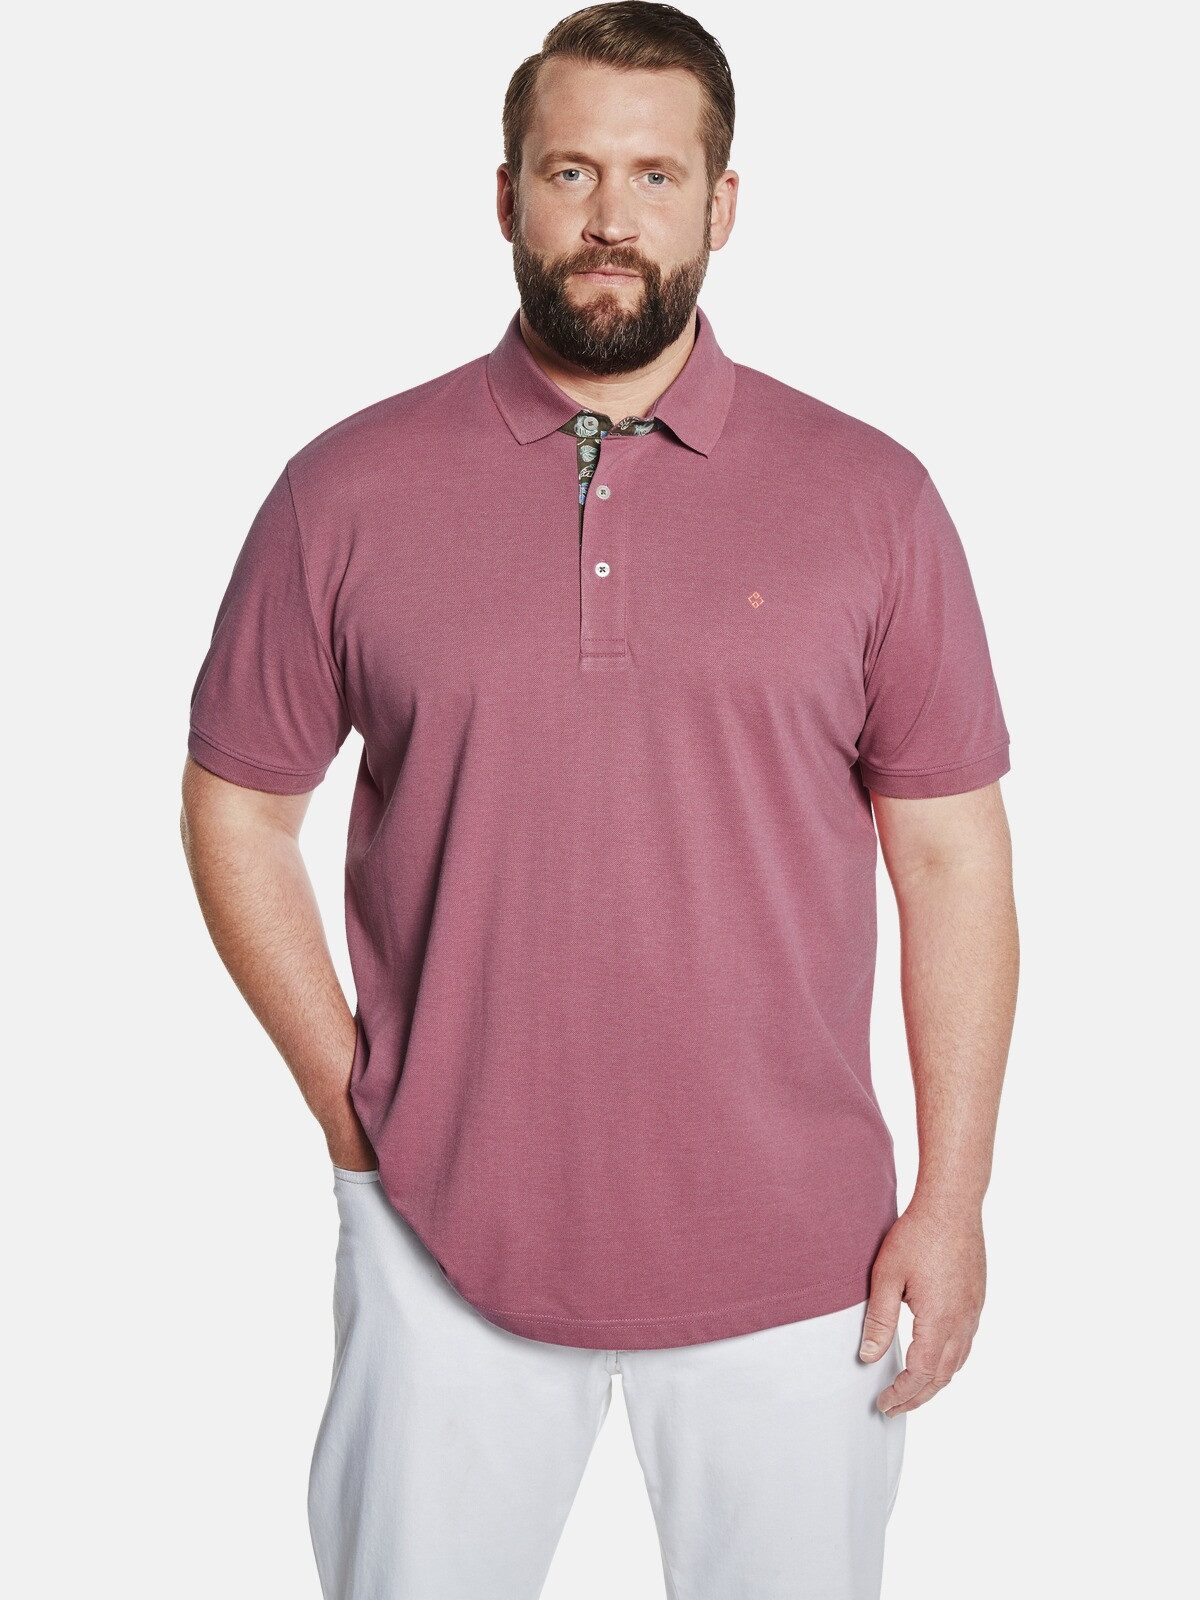 Charles Colby Poloshirt EARL LACHLAN in zwei Farbvariationen